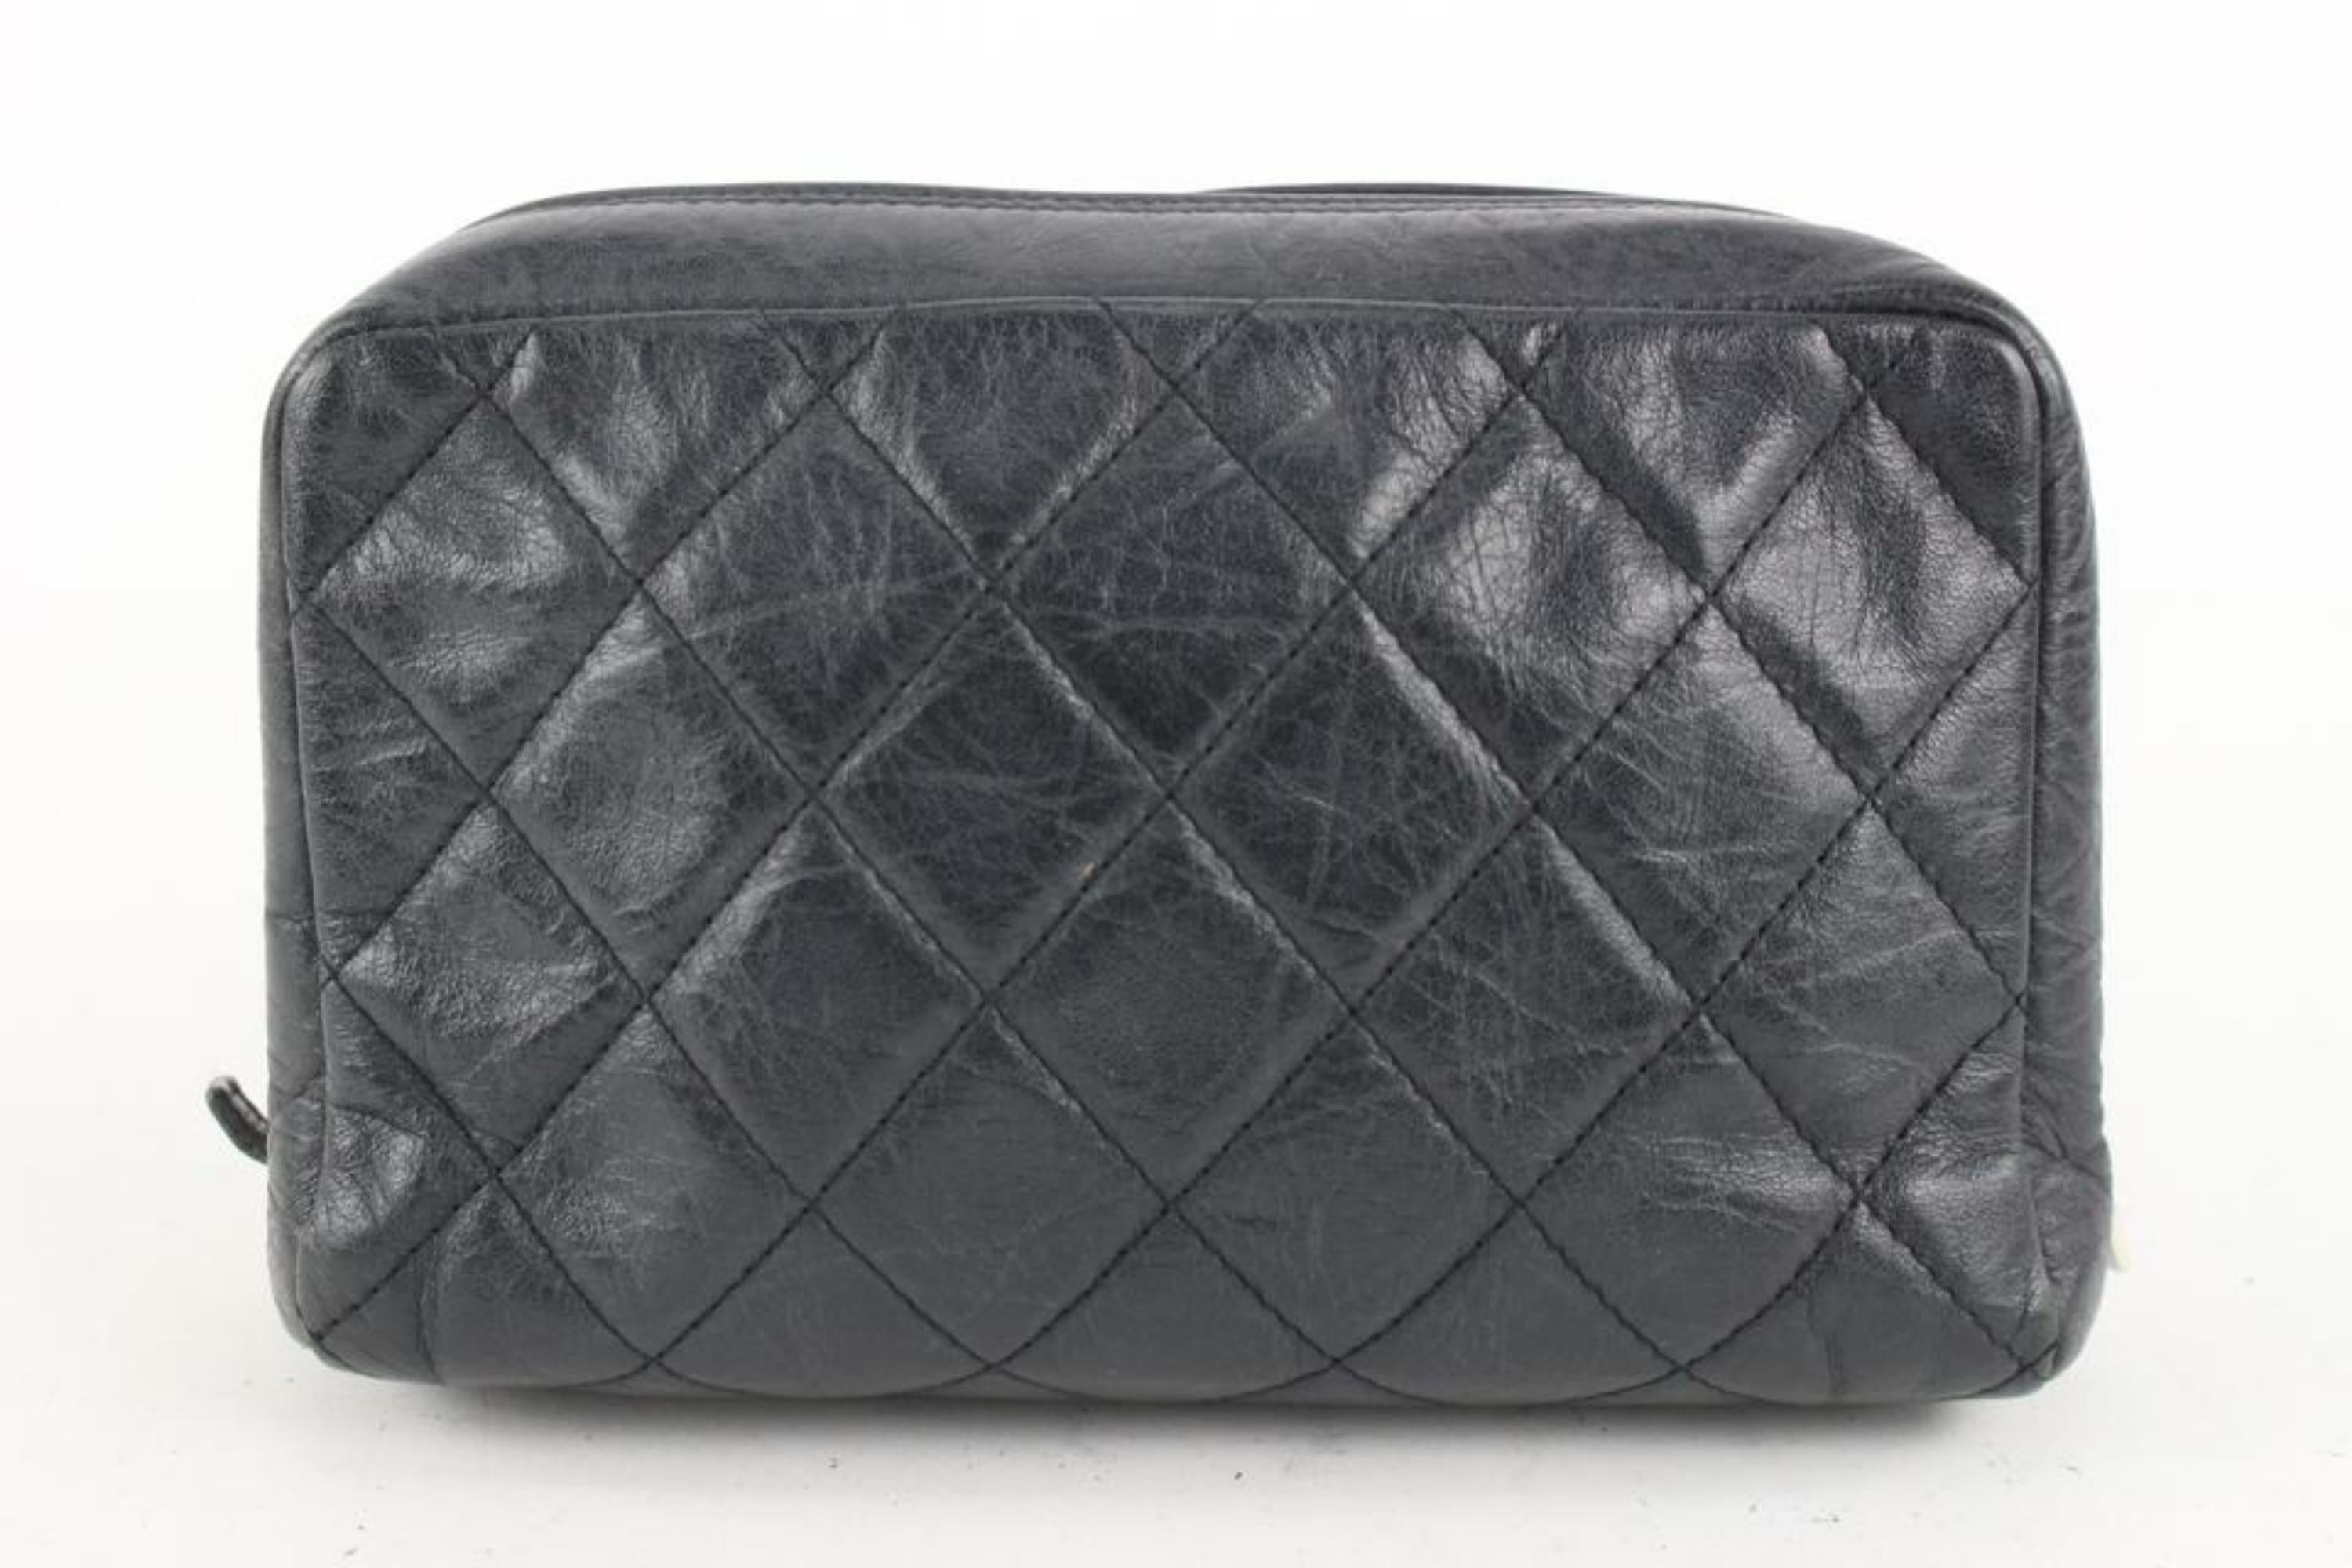 Chanel Black Quilted Caviar Leather Mini Rectangular Sunglass Flap Bag 1CC111 For Sale 3